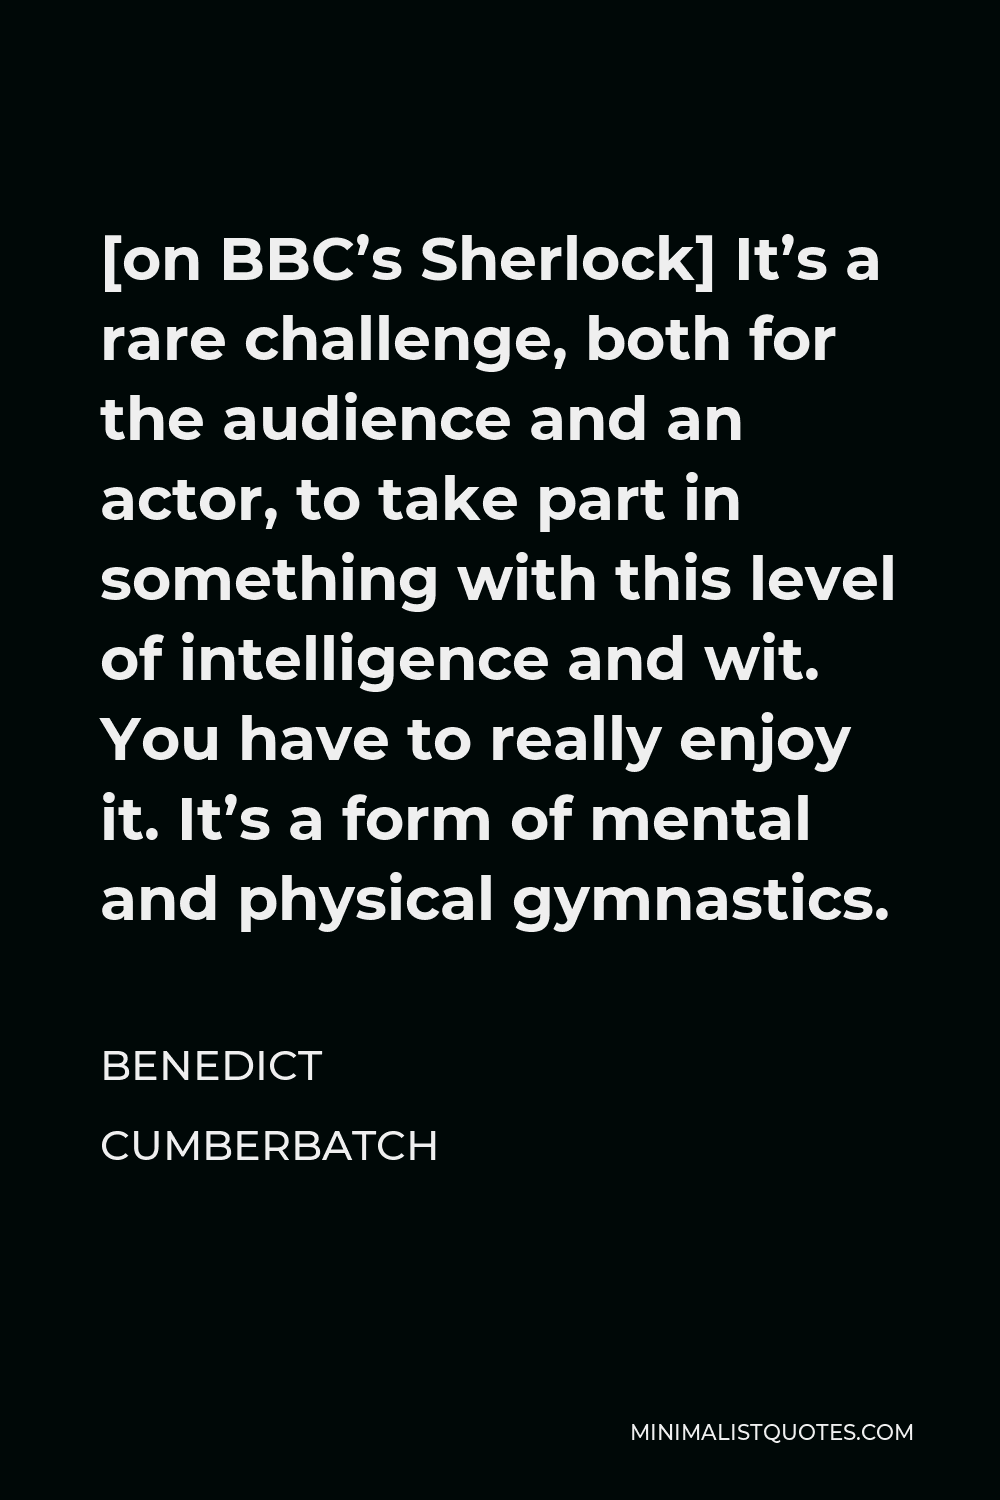 Benedict Cumberbatch Quote - [on BBC’s Sherlock] It’s a rare challenge, both for the audience and an actor, to take part in something with this level of intelligence and wit. You have to really enjoy it. It’s a form of mental and physical gymnastics.